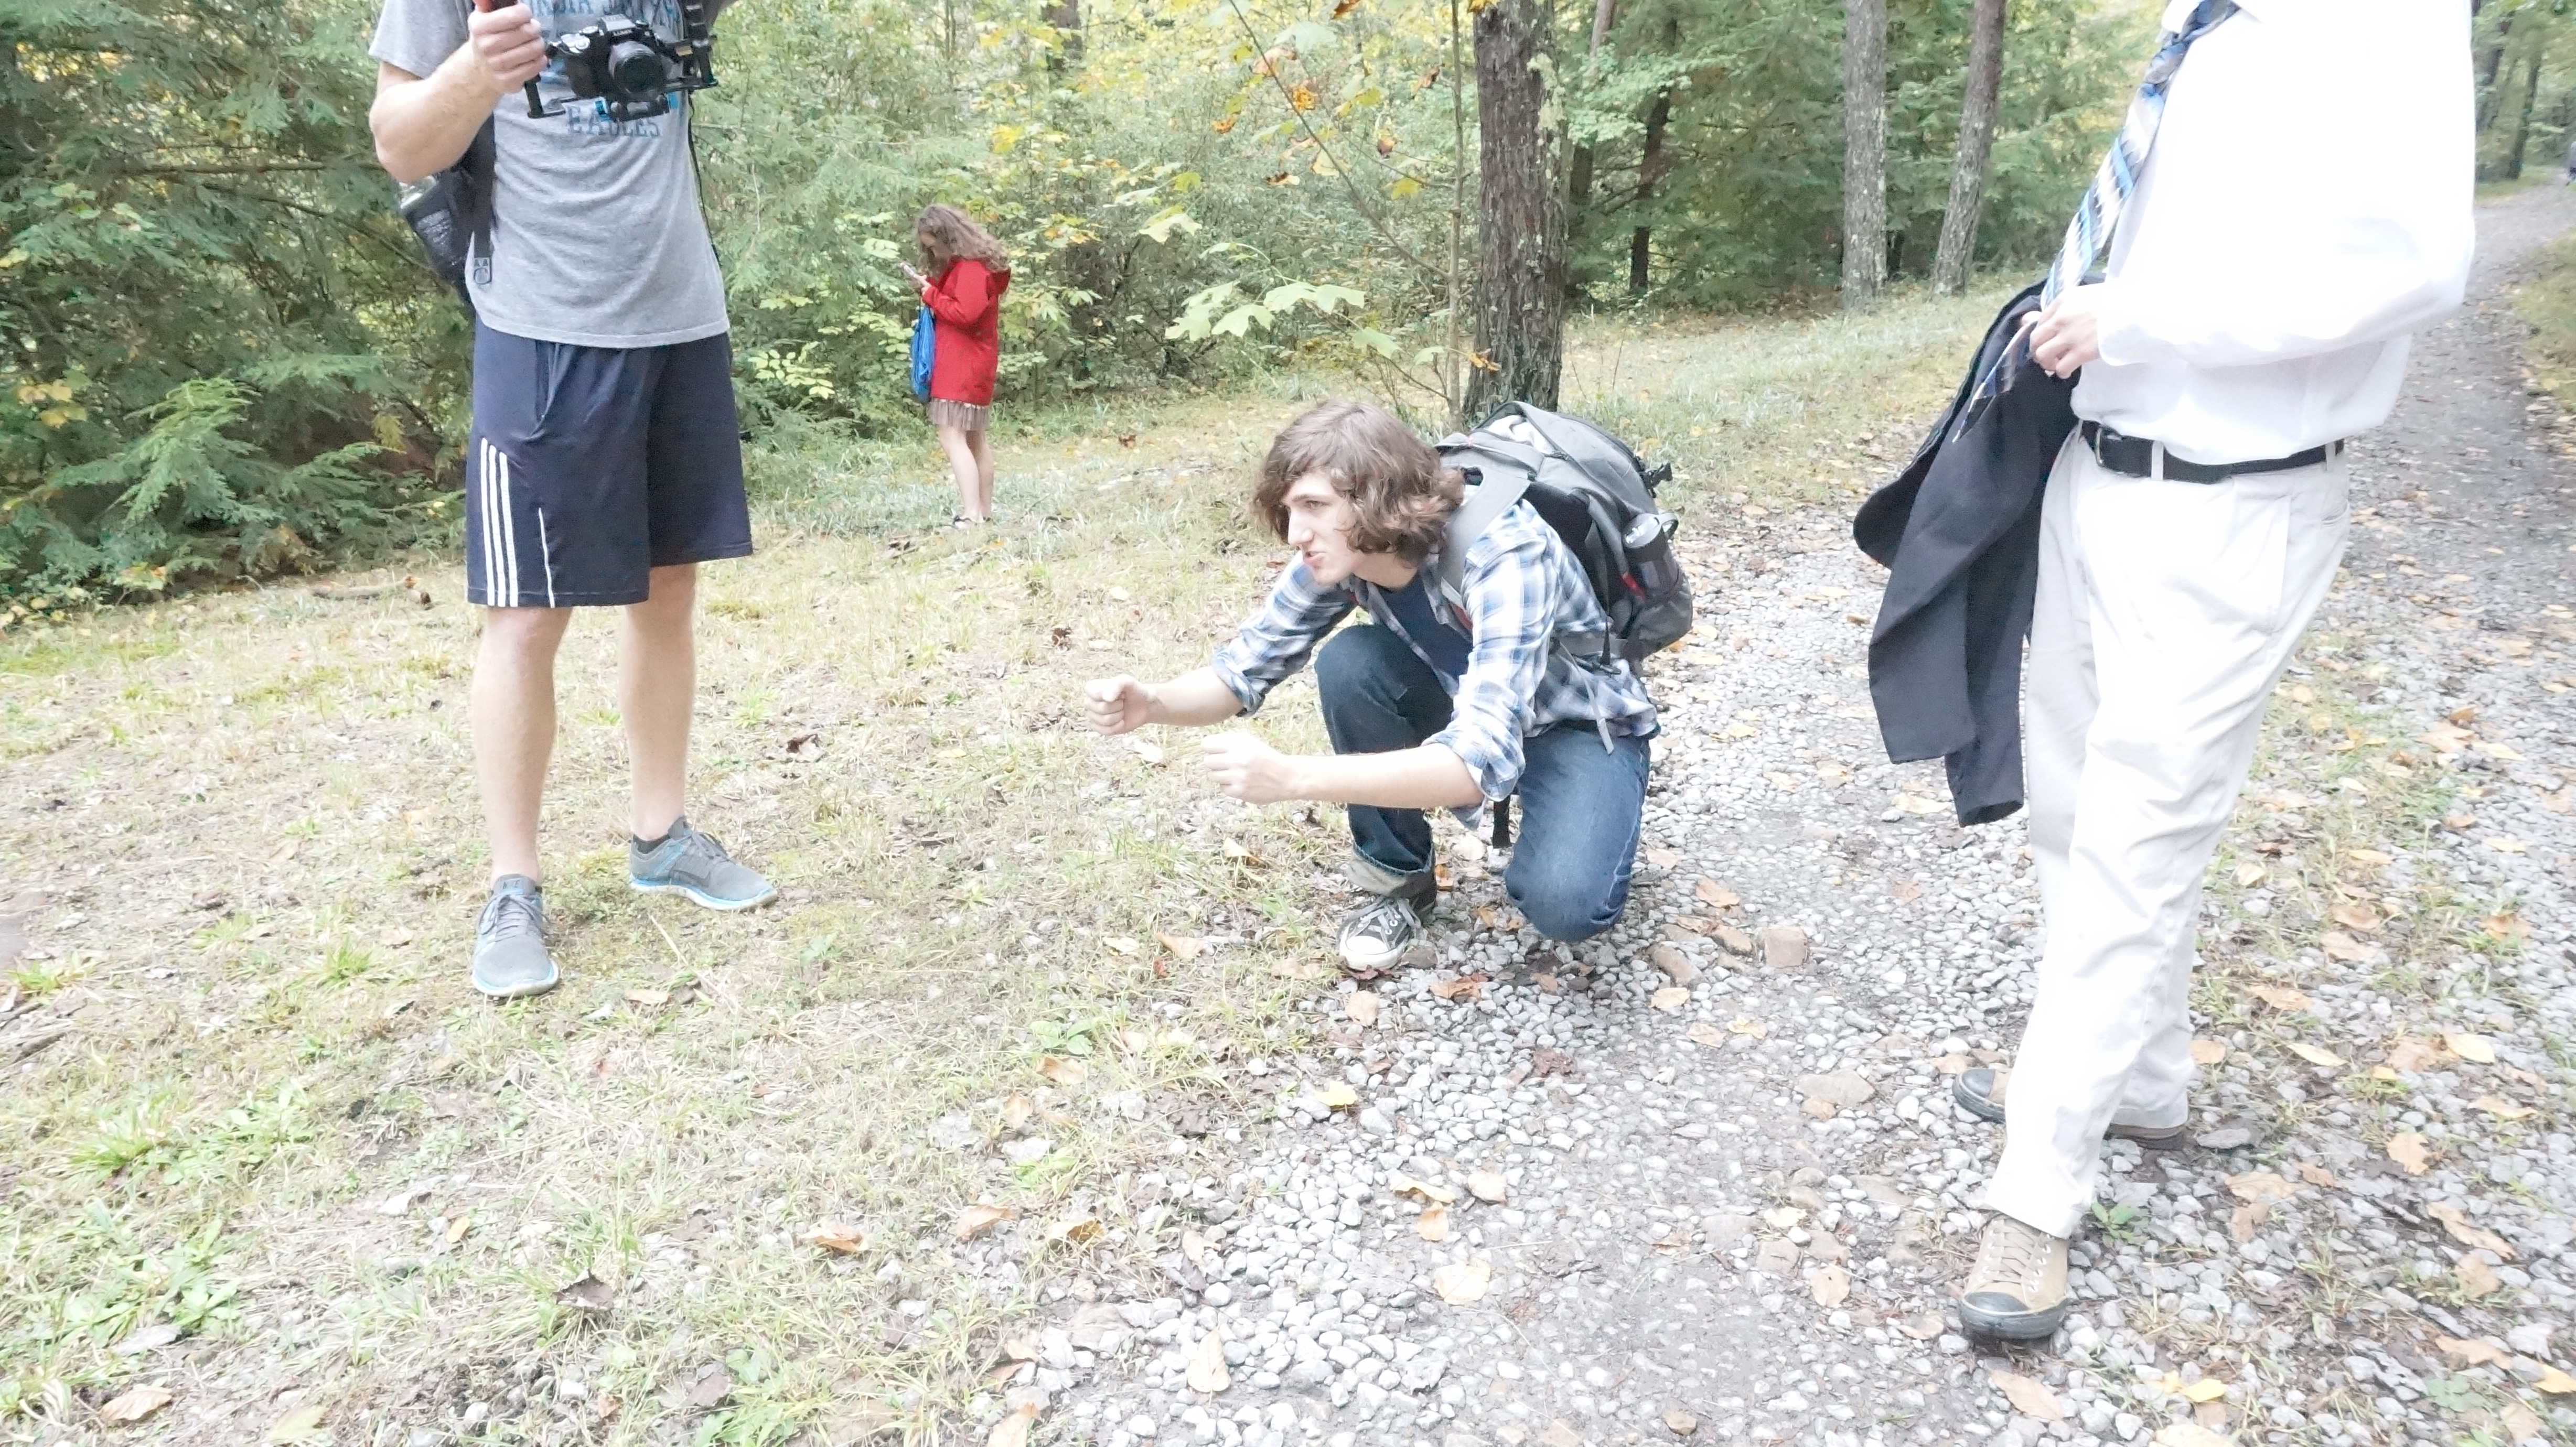 Connor Rentz on location for principal photography of Spectrum, October 2015.